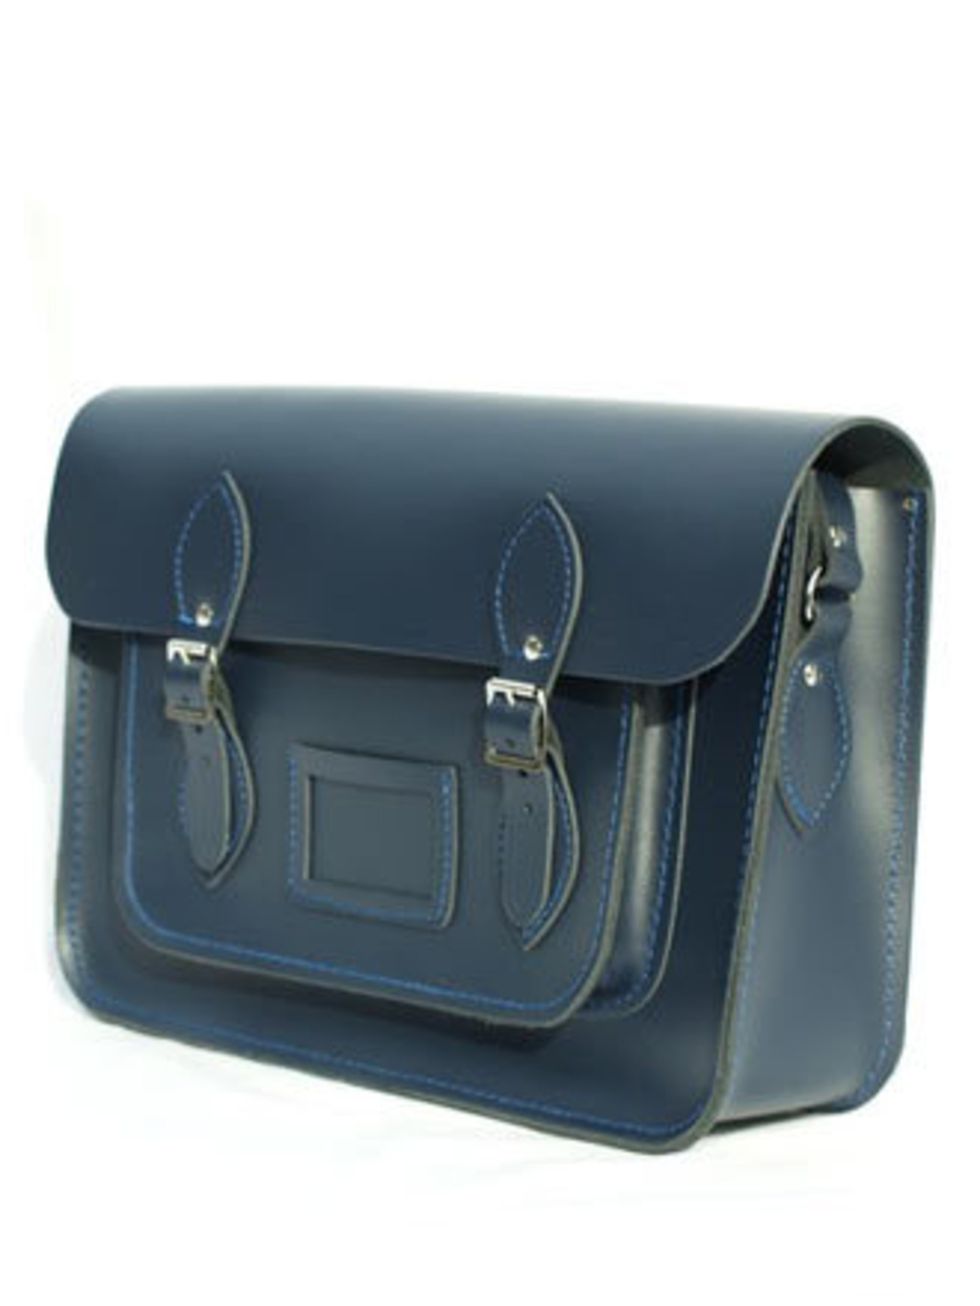 <p>This spring/summer utility is a big trend. Accessories like this satchel are not only nice to look at, they're practical too.</p><p>Leather satchel, £66.39 by <a href="http://www.cambridgesatchel.co.uk/15-navy-satchel-118-p.asp">The Cambridge Satchel C